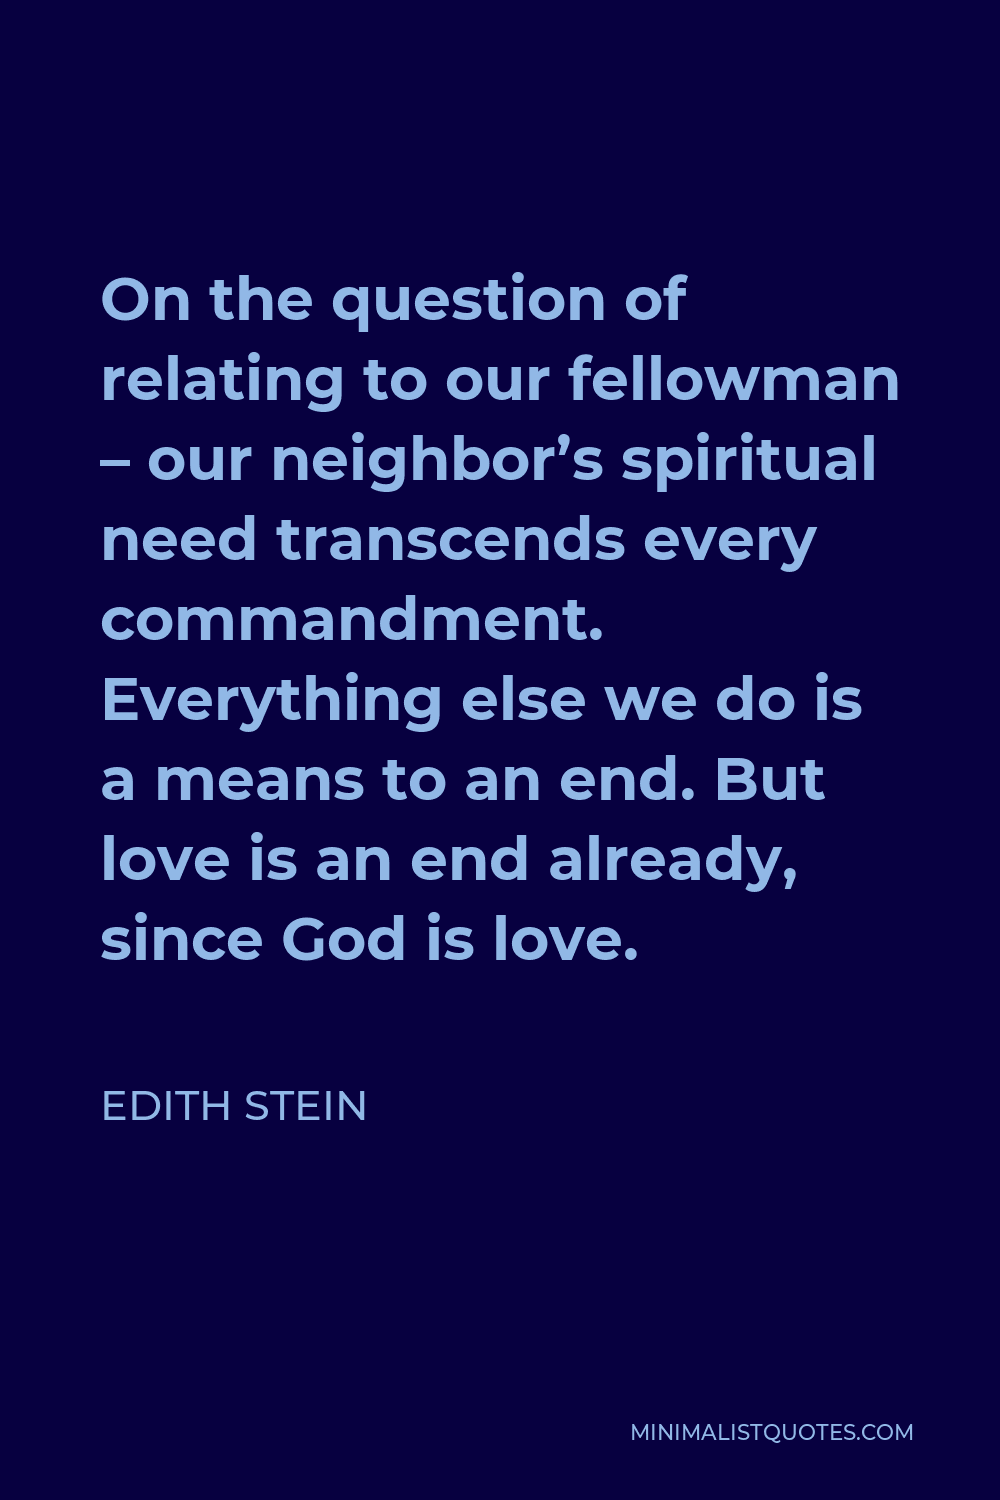 Edith Stein Quote - On the question of relating to our fellowman – our neighbor’s spiritual need transcends every commandment. Everything else we do is a means to an end. But love is an end already, since God is love.